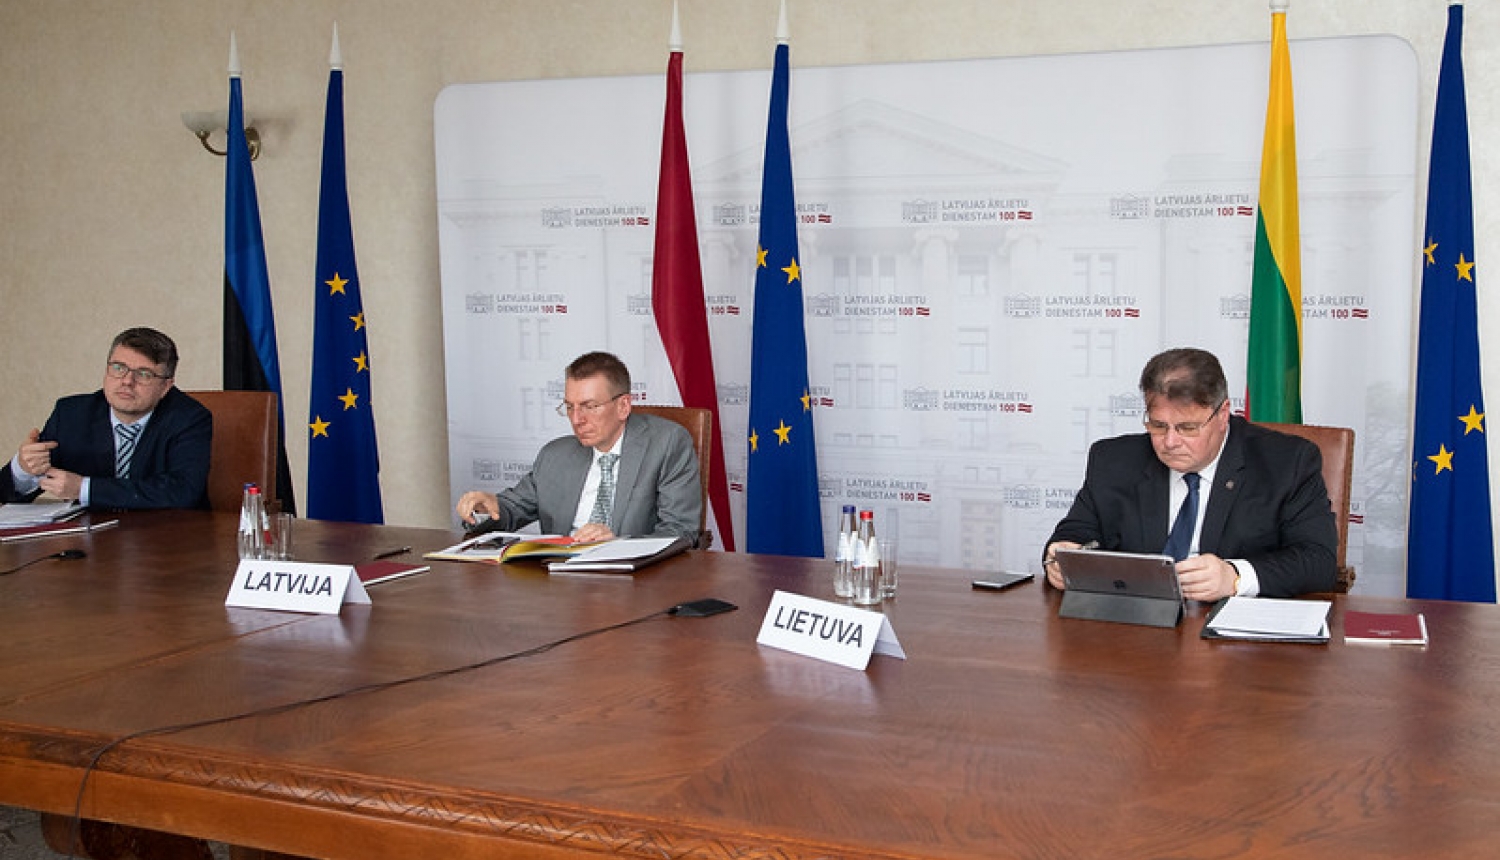 Edgars Rinkēvičs supports unified EU position on Middle East Peace Process